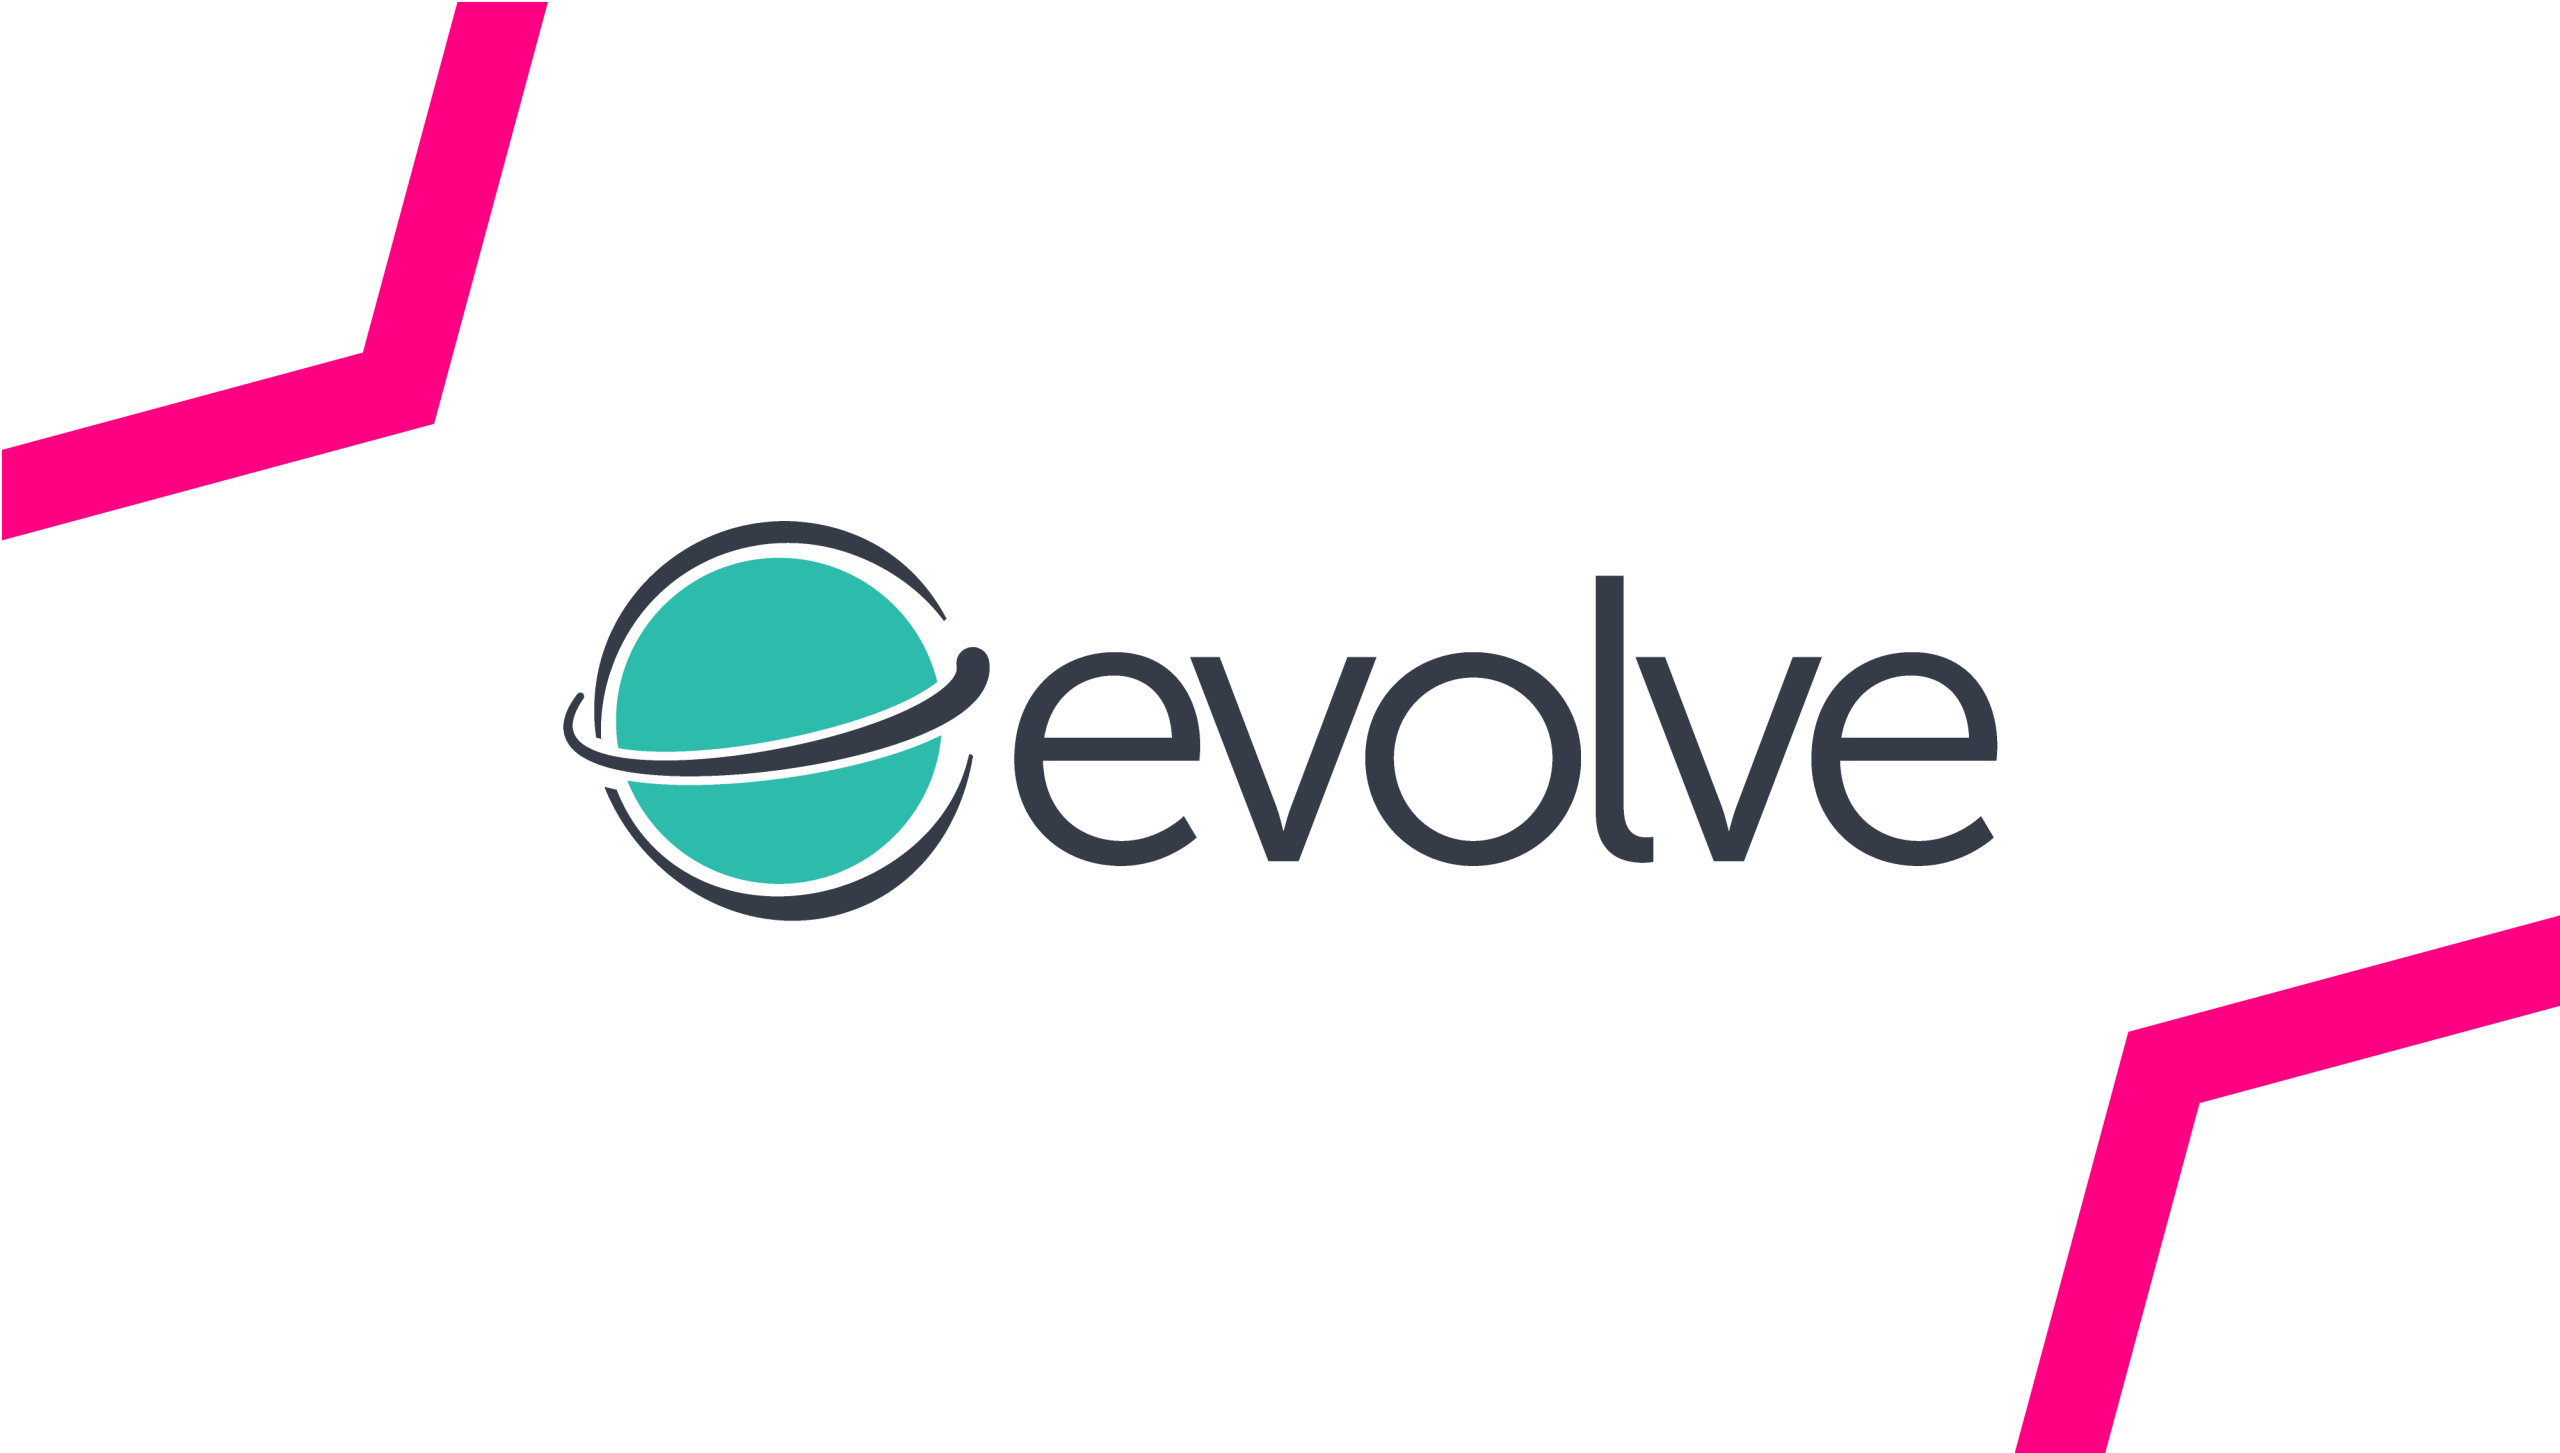 Evolve OOH Partners with Hivestack to Deliver Measurable Business Outcomes for EMEA Advertisers